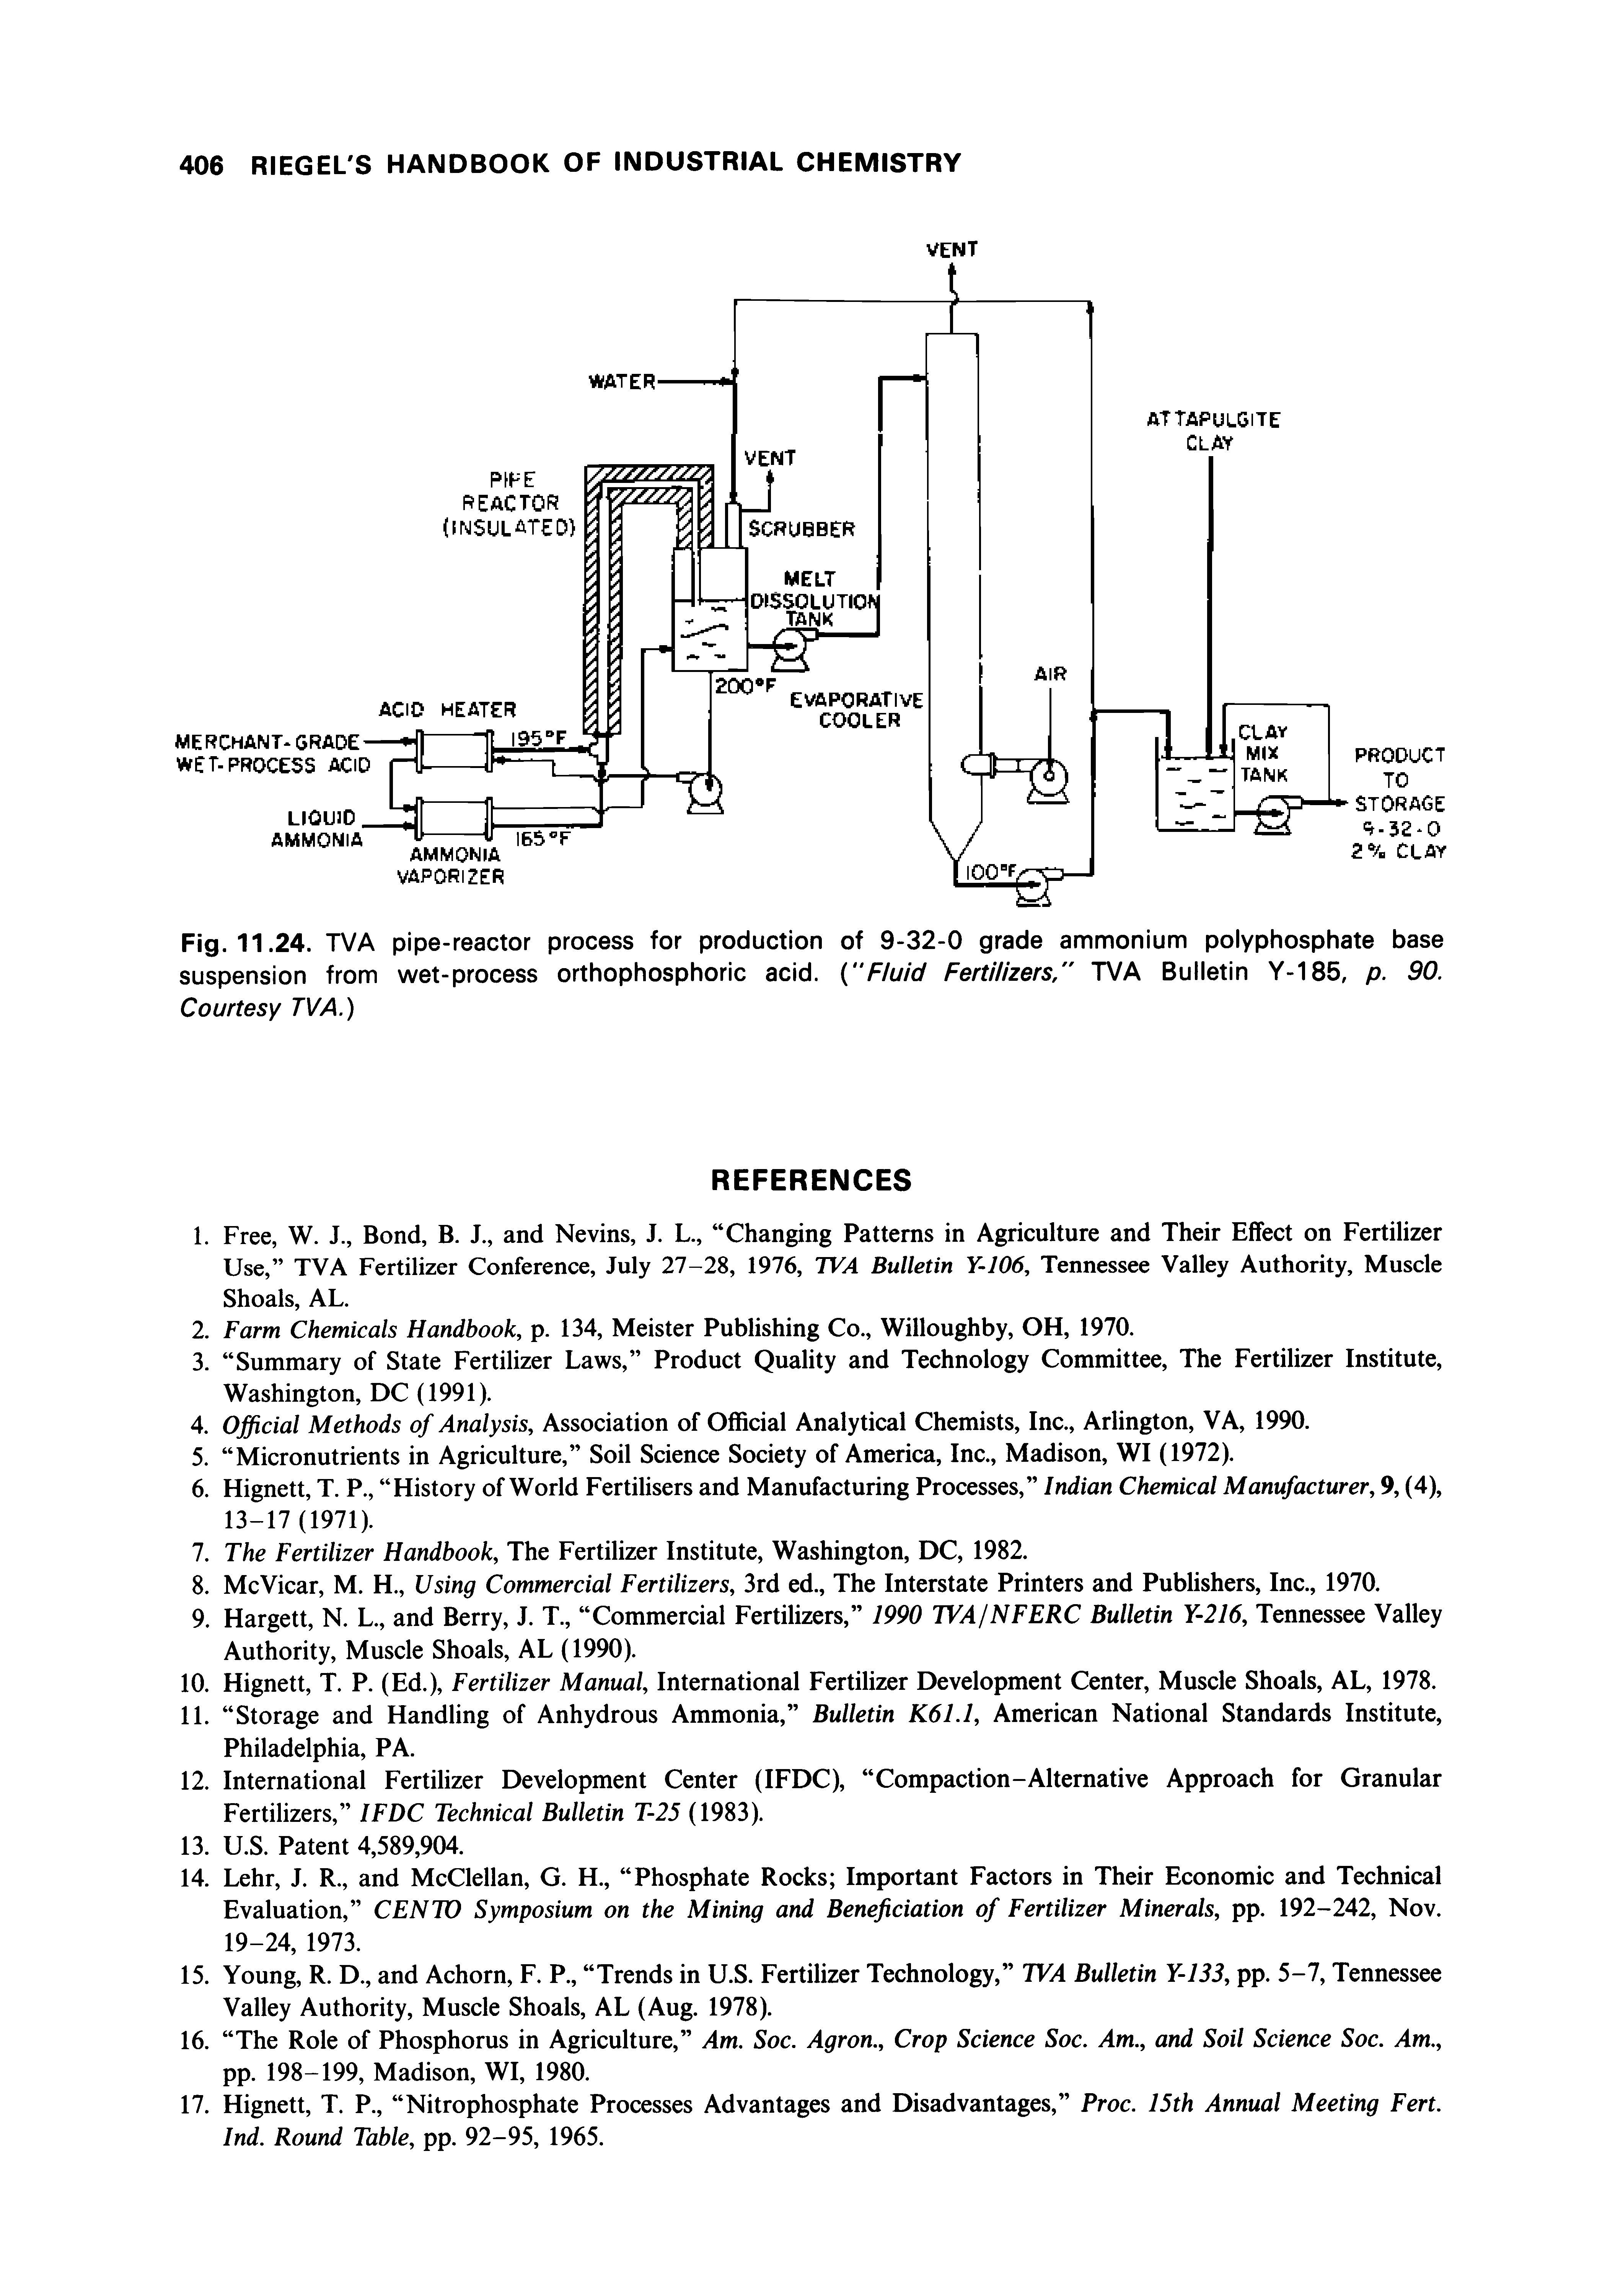 Fig. 11.24. TVA pipe-reactor process for production of 9-32-0 grade ammonium polyphosphate base suspension from wet-process orthophosphoric acid. ( Fluid Fertilizers TVA Bulletin Y-185, p. 90. Courtesy TVA.)...